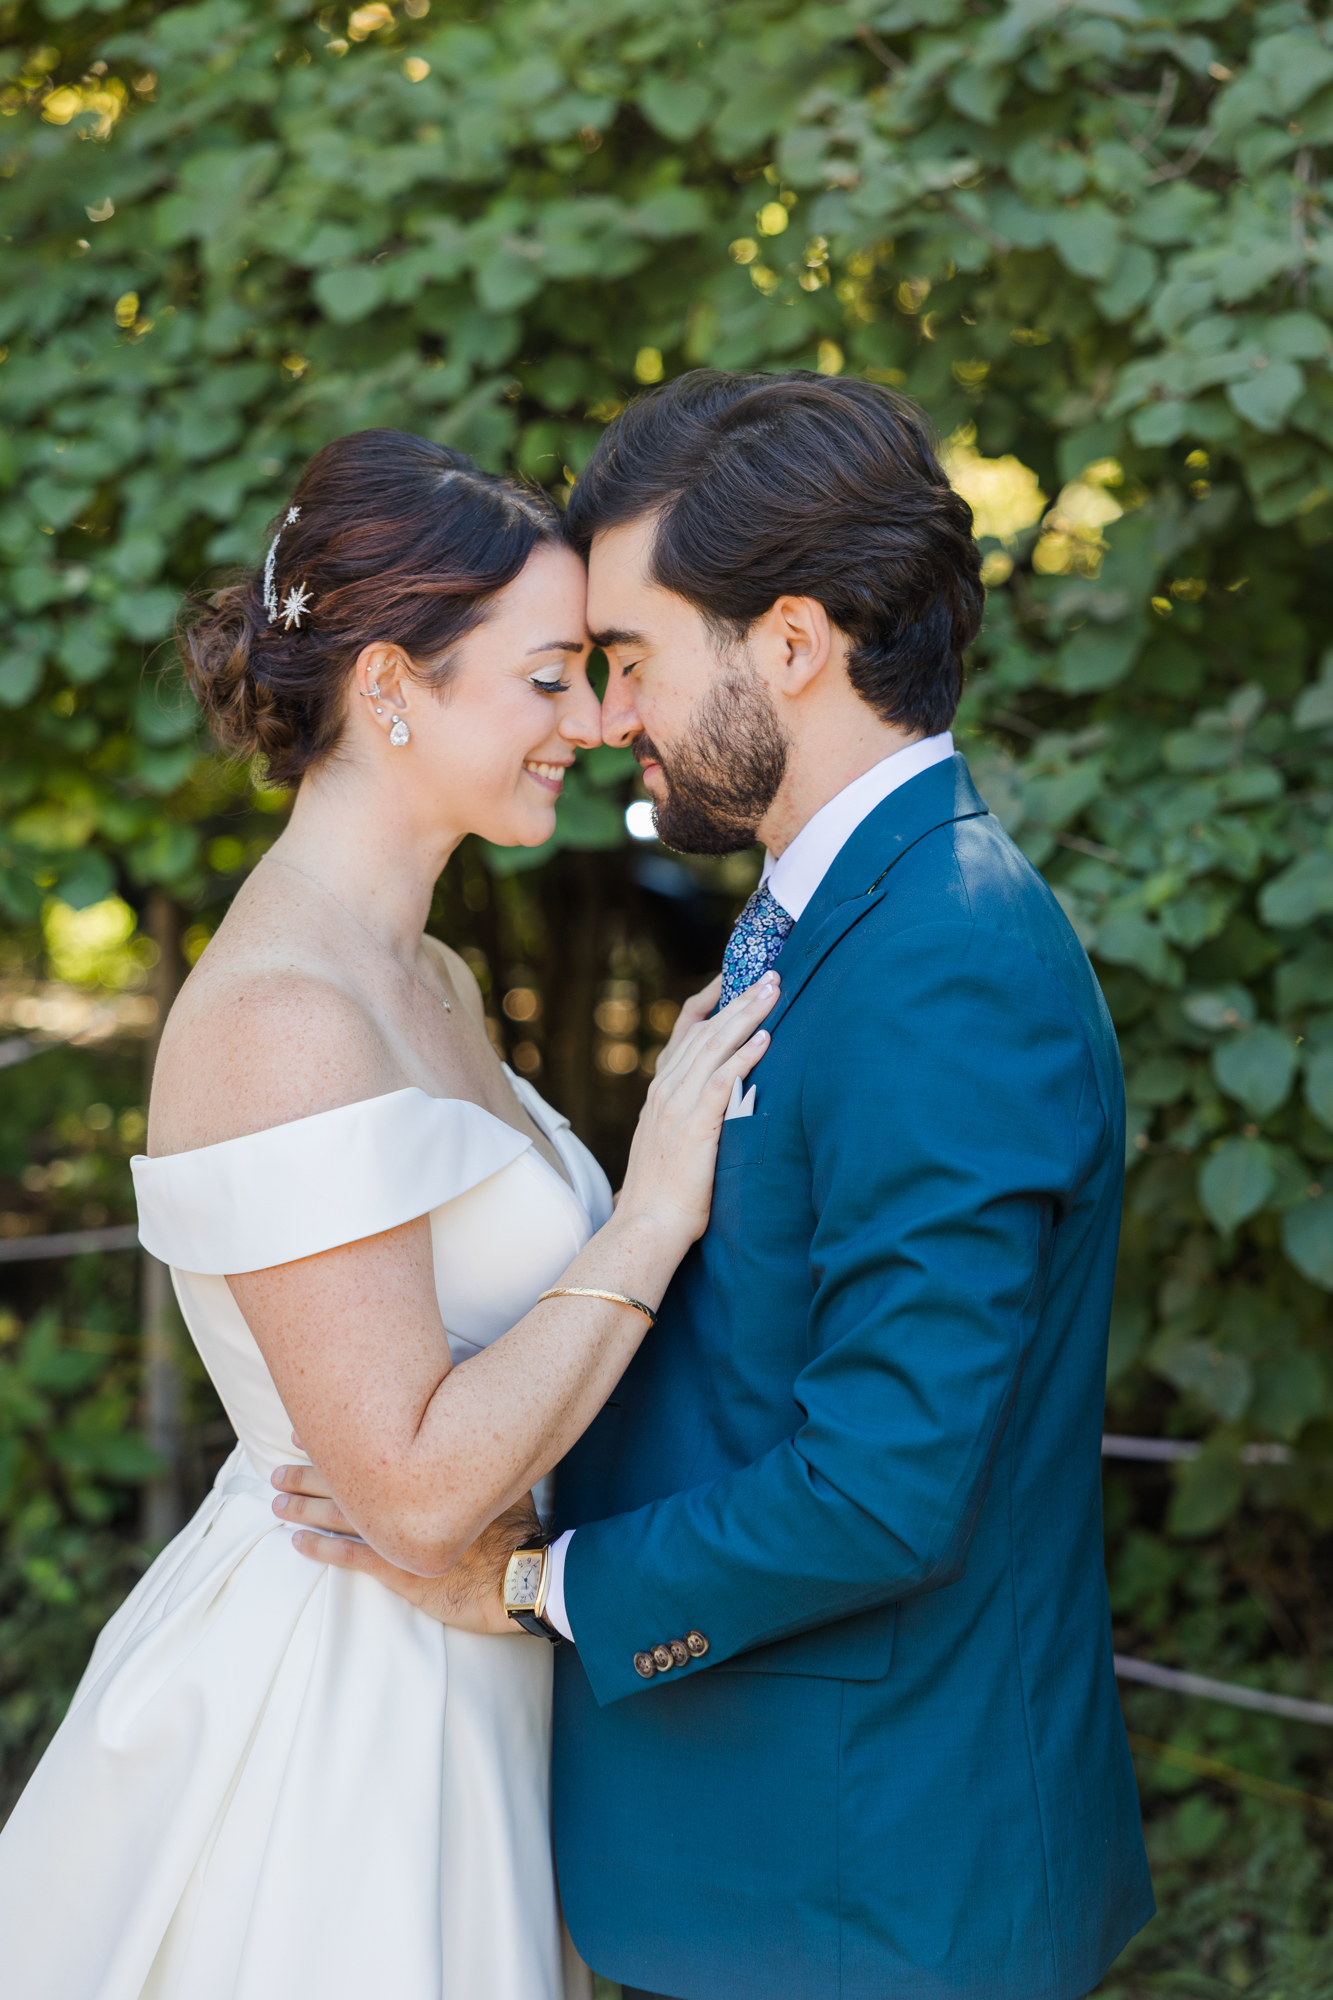 Dazzling Autumn Wedding Photos at the Prospect Park Boathouse in Brooklyn